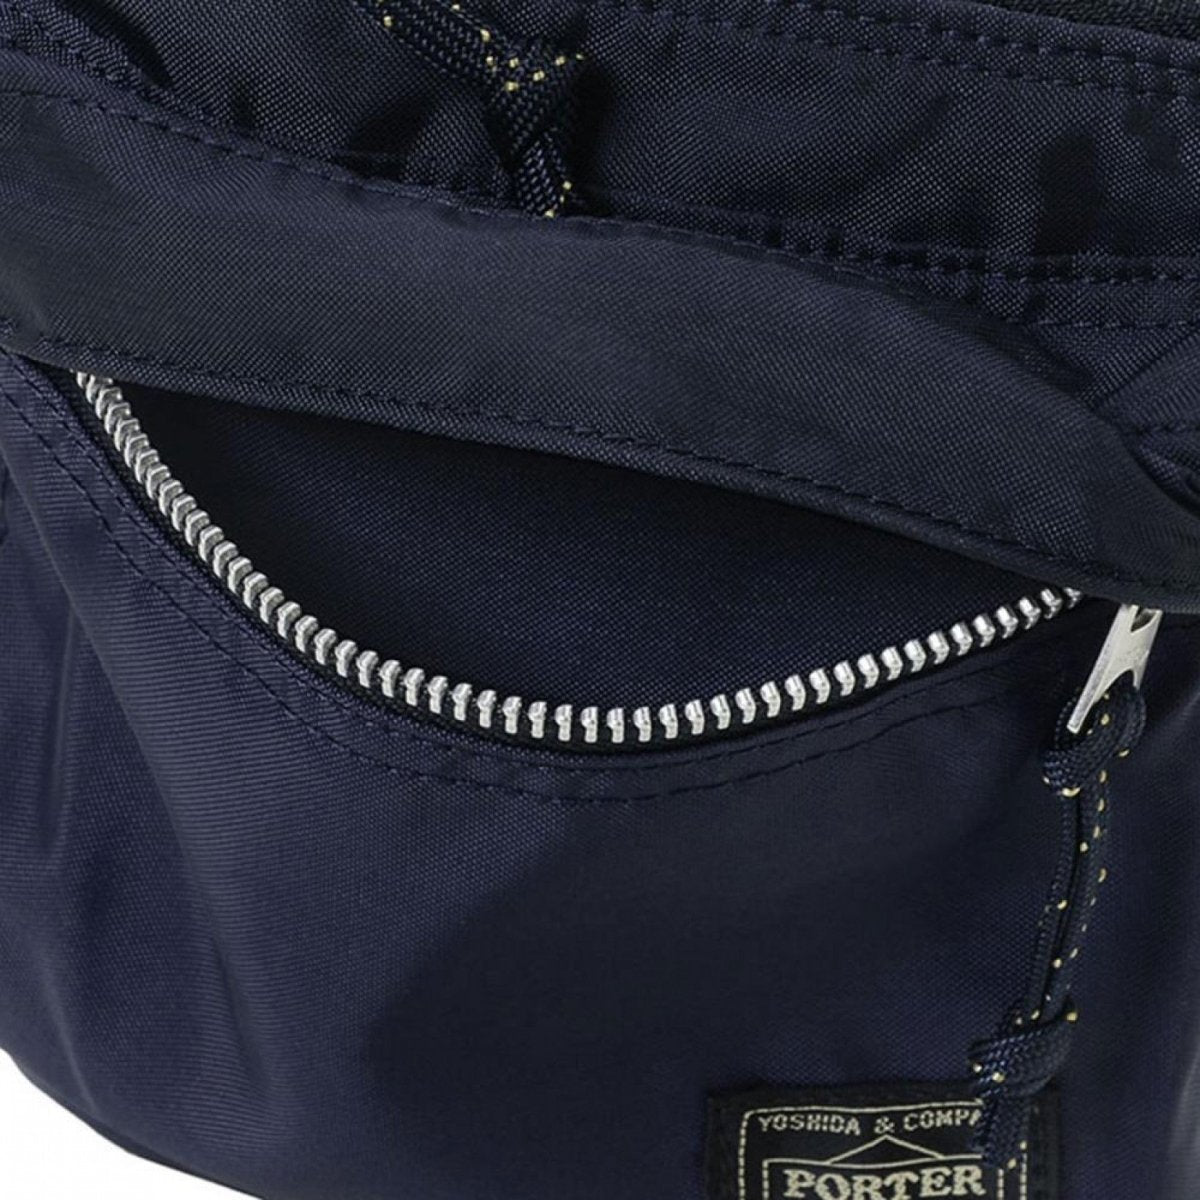 Porter by Yoshida Force Series Shoulder Pouch (Navy)  - Allike Store